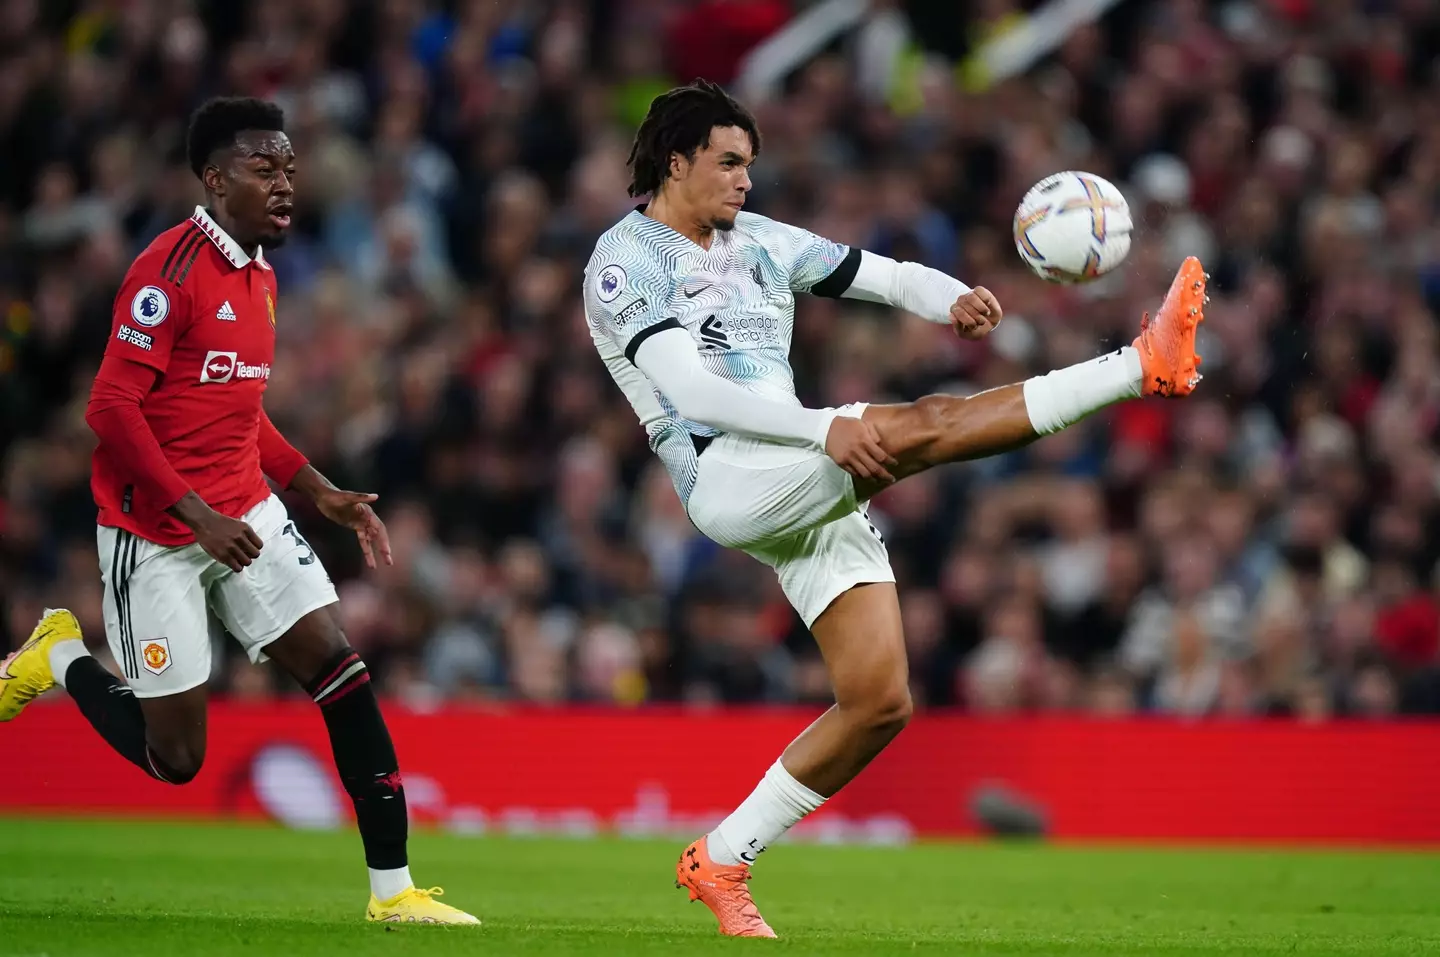 Alexander-Arnold had a tricky evening at Old Trafford. (Image